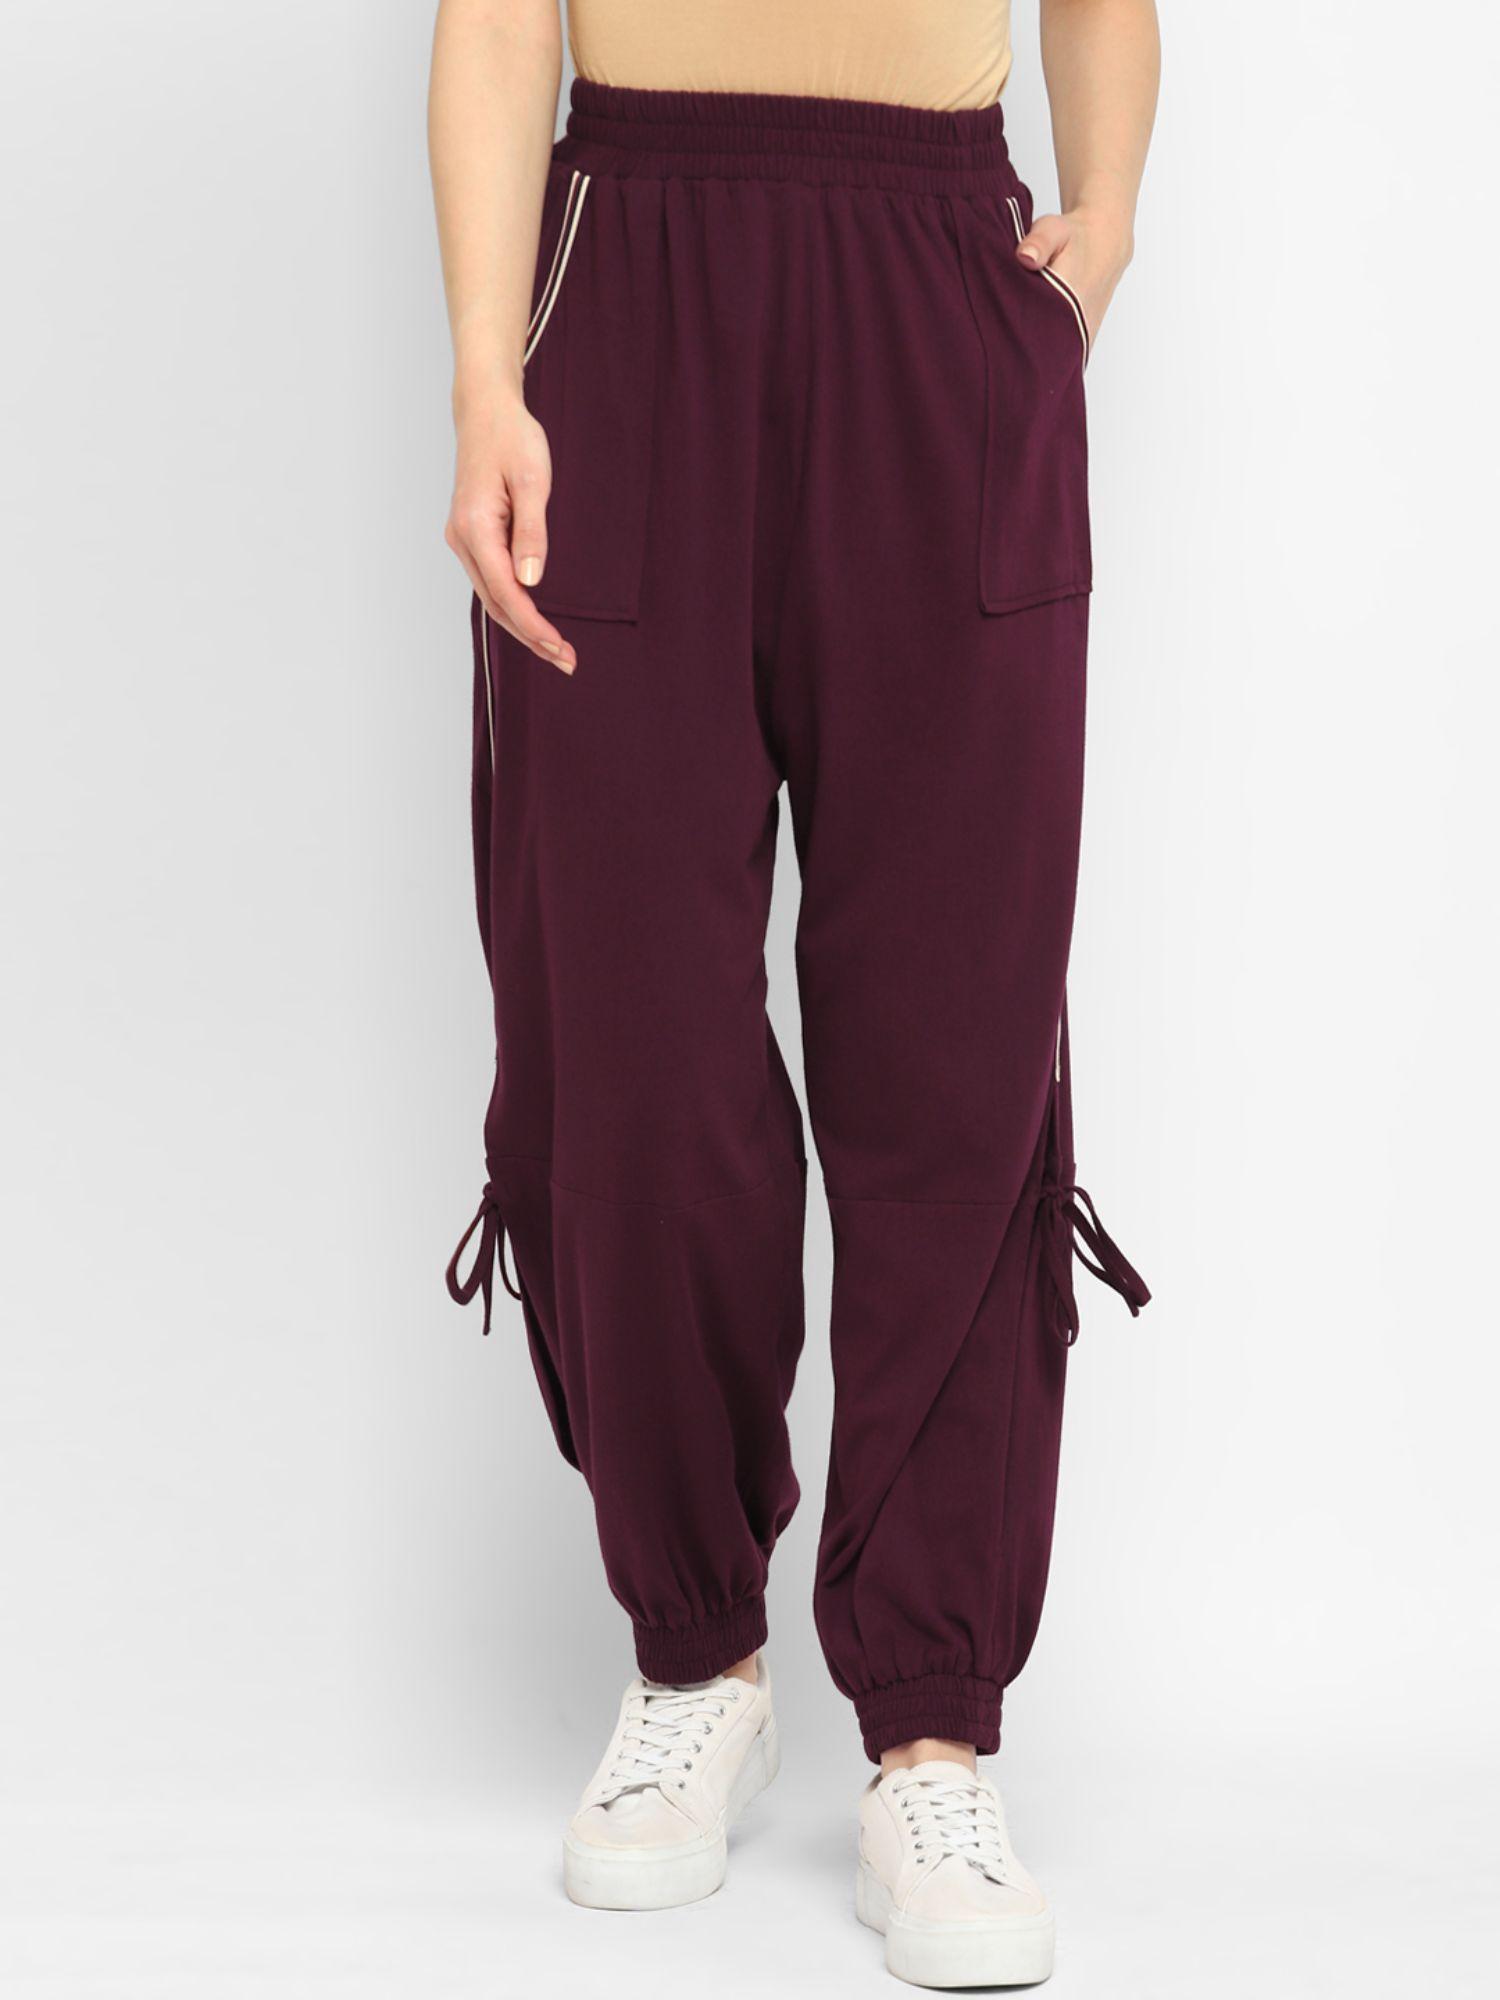 maroon solid jersey knit joggers for women